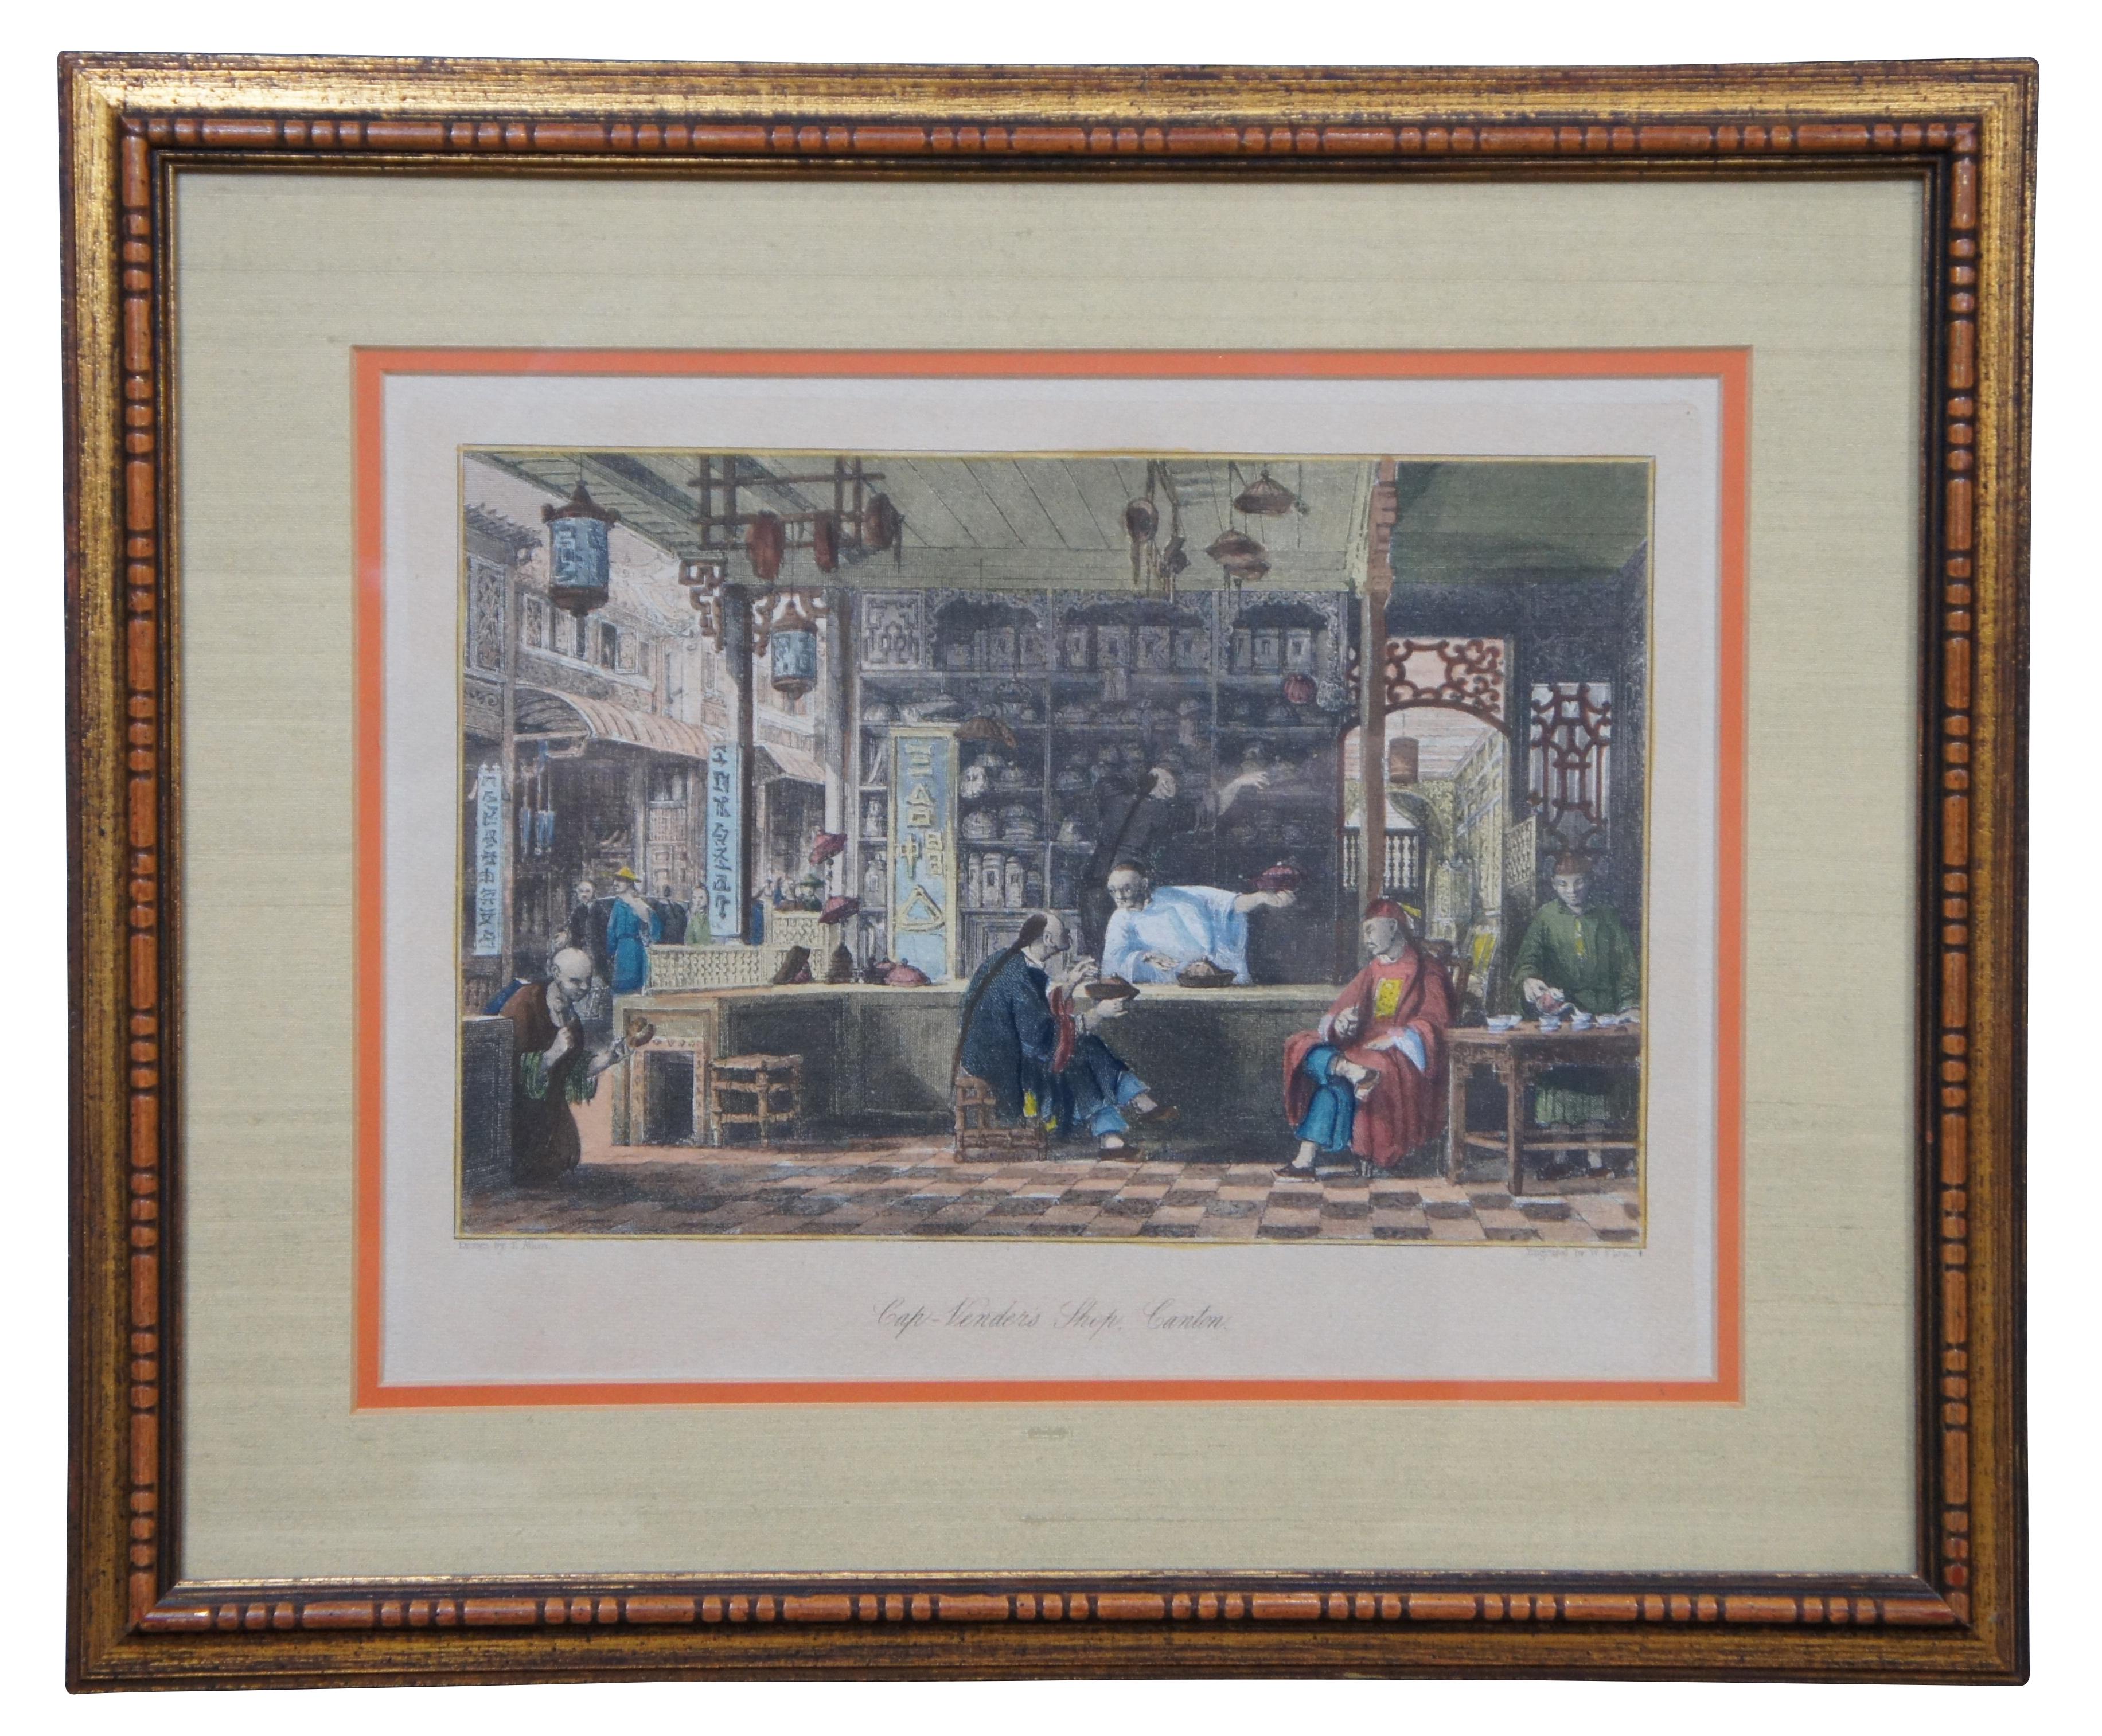 Set of two 19th century hand colored chinoiserie engravings of Cantonese / Chinese city scenes, “cap Vender’s Shop, Canton,” drawn by Thomas Allom, engraved by W. Floyd and “Dying and Winding Silk,” drawn by Thomas Allom, engraved by G. Paterson.